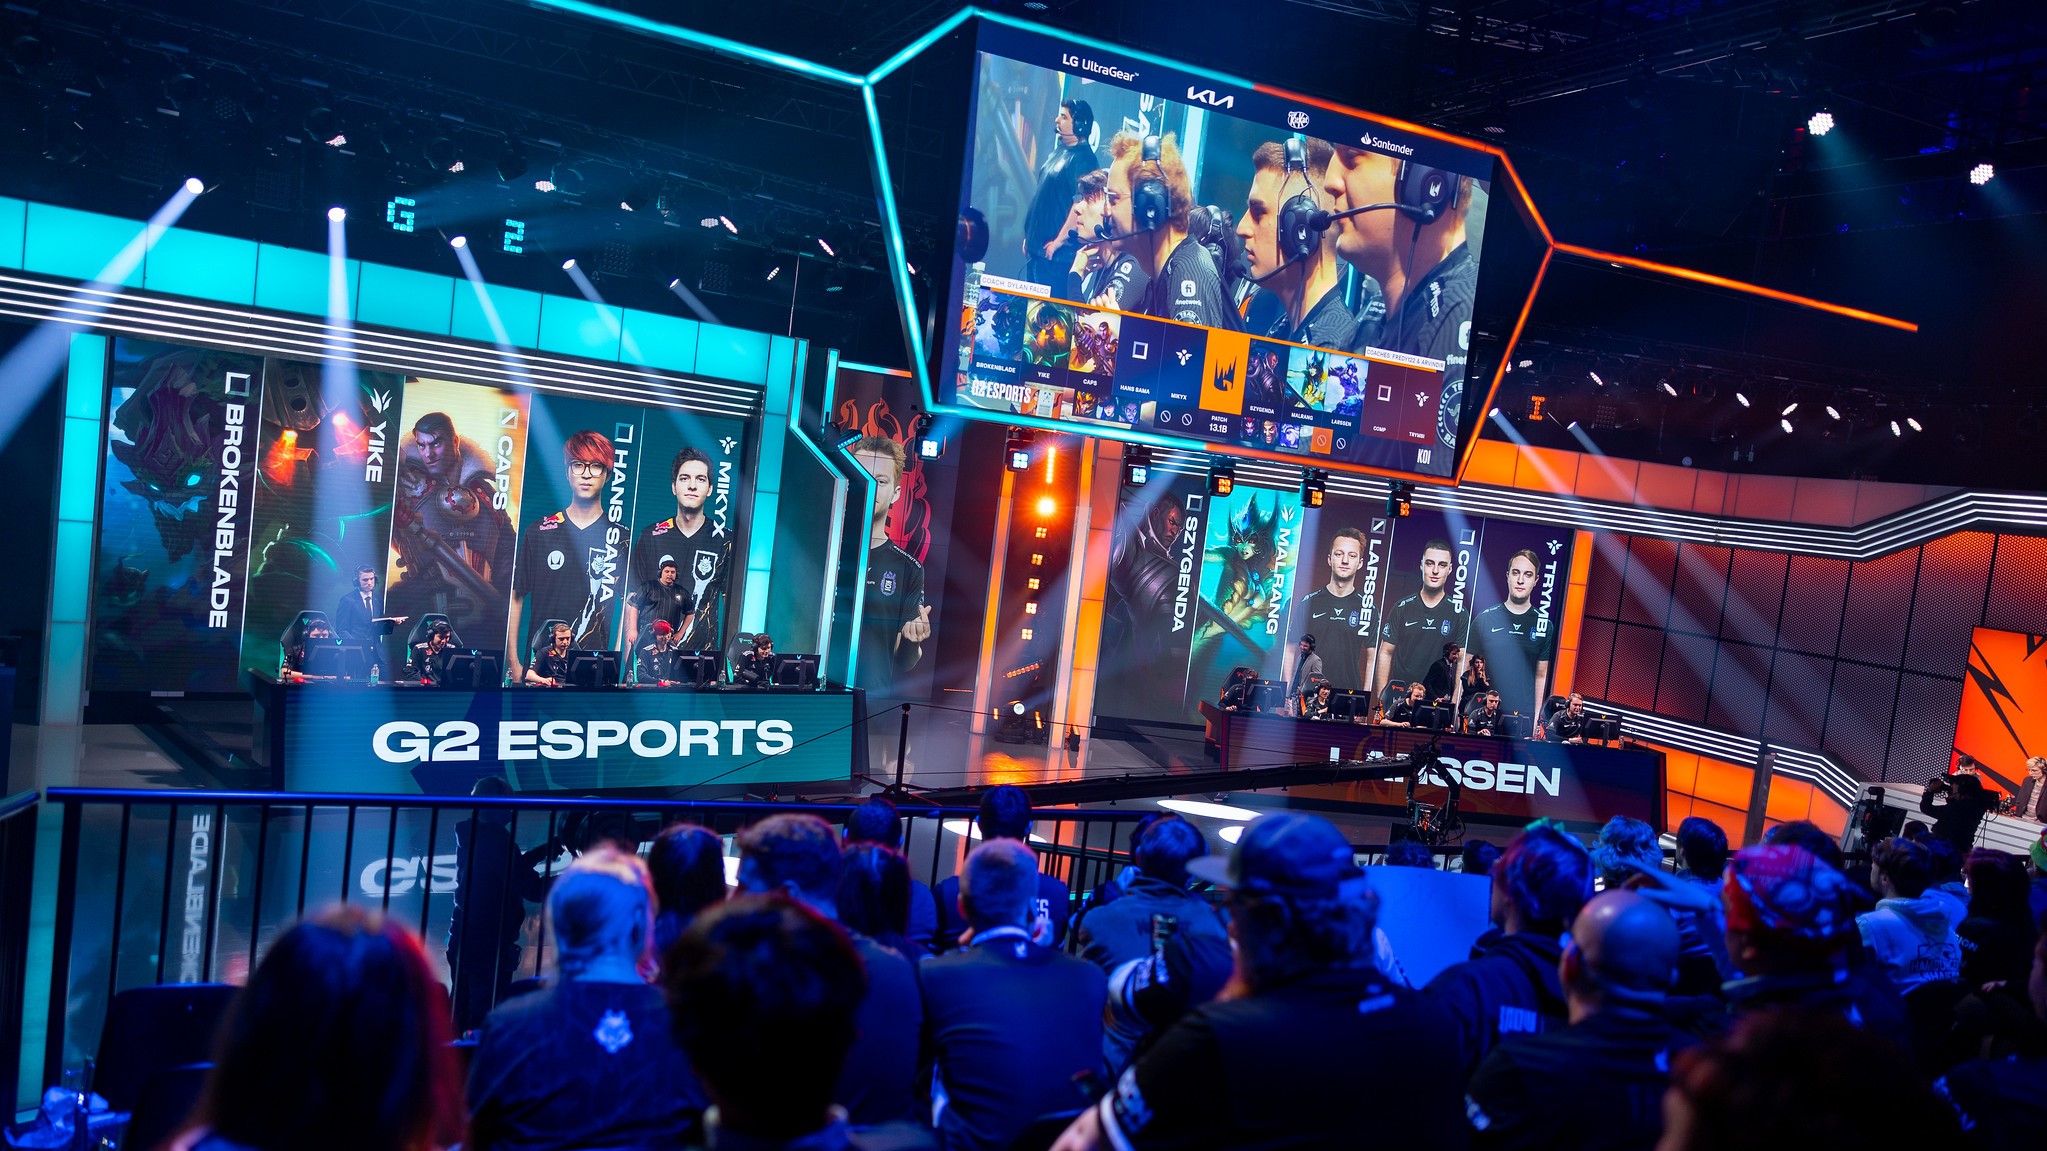 League of Legends - News, Stats, Players, Teams, and More - Dot Esports